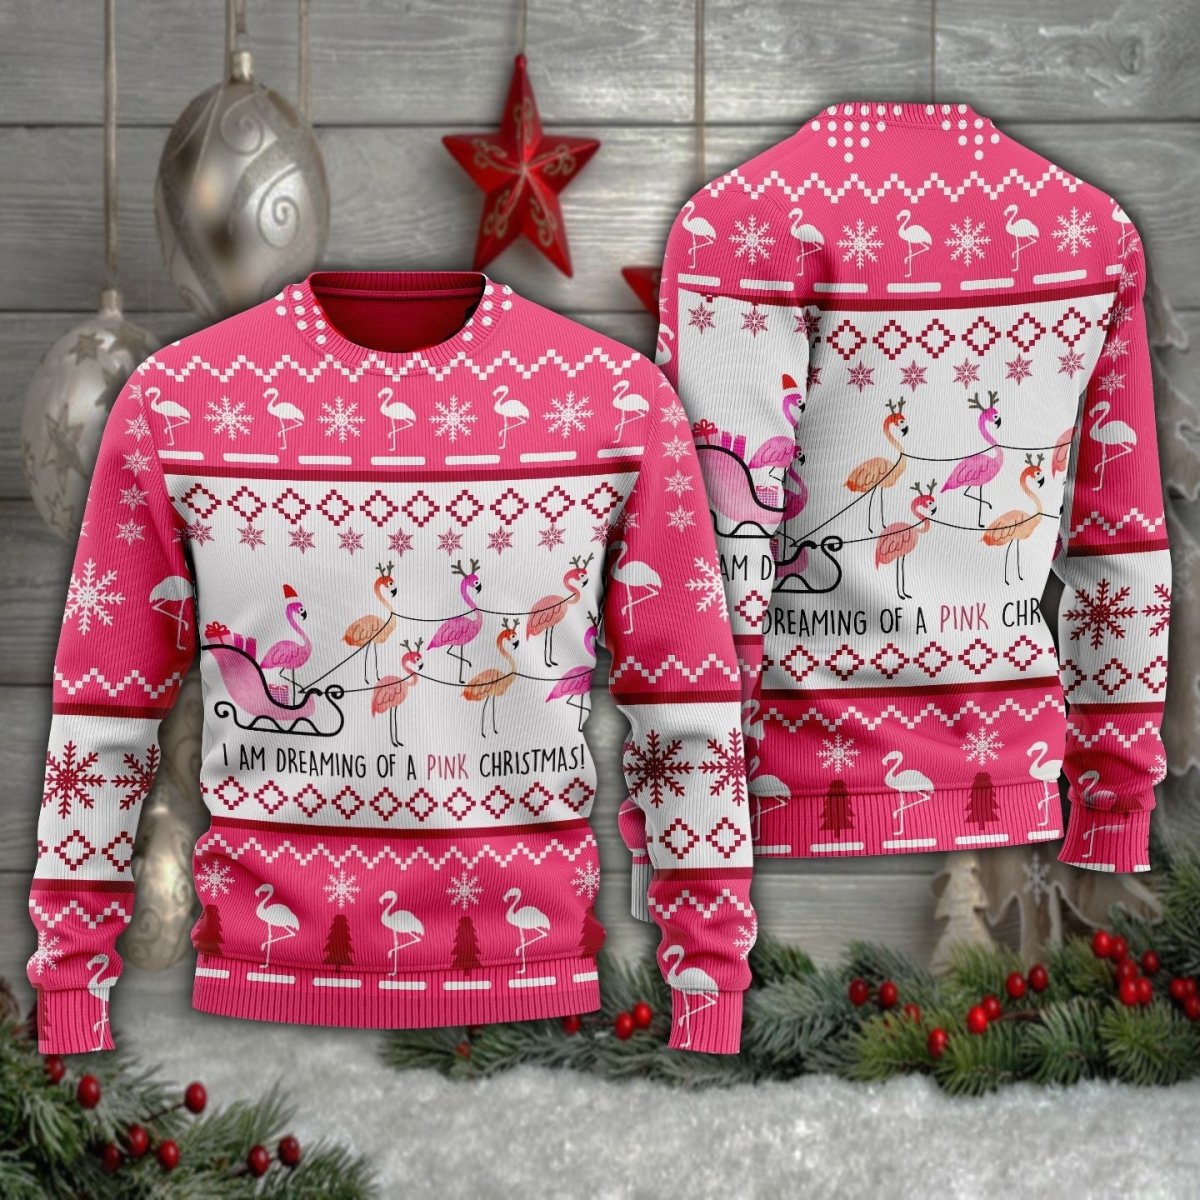 I'm dreaming of a pink christmas Ugly Sweater - TG1021DT